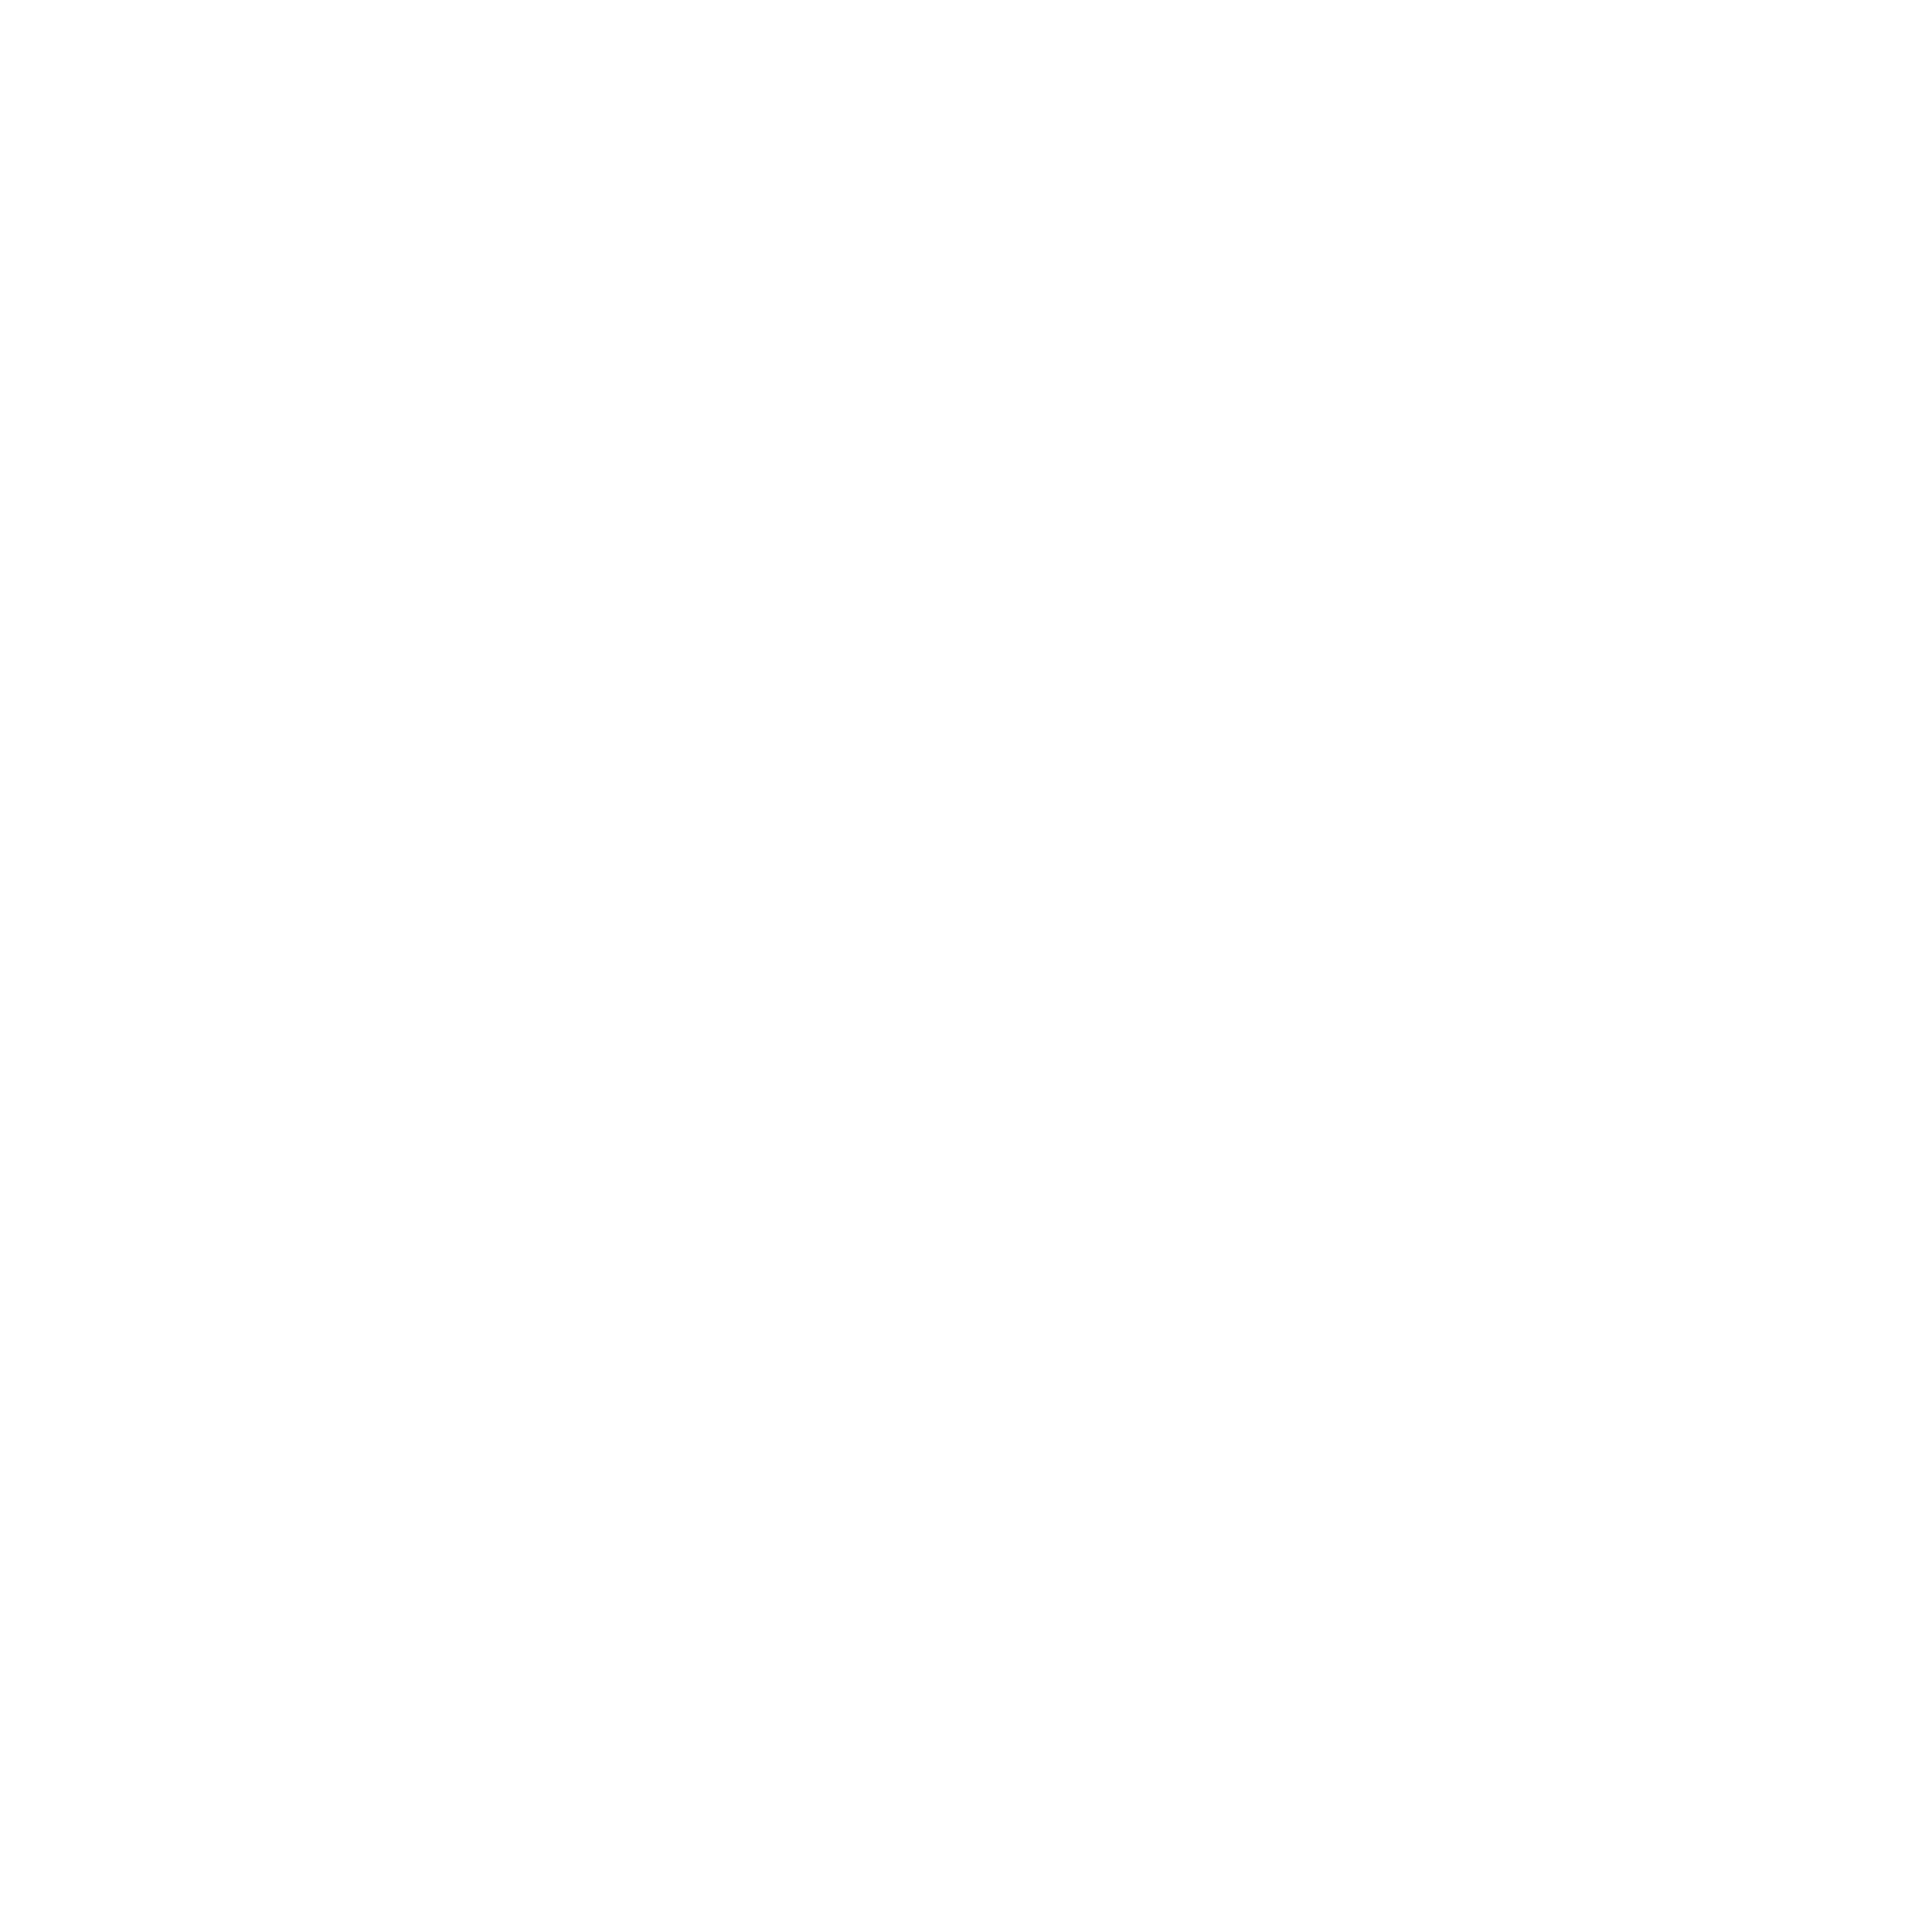 PayU Logo Transparent Picture